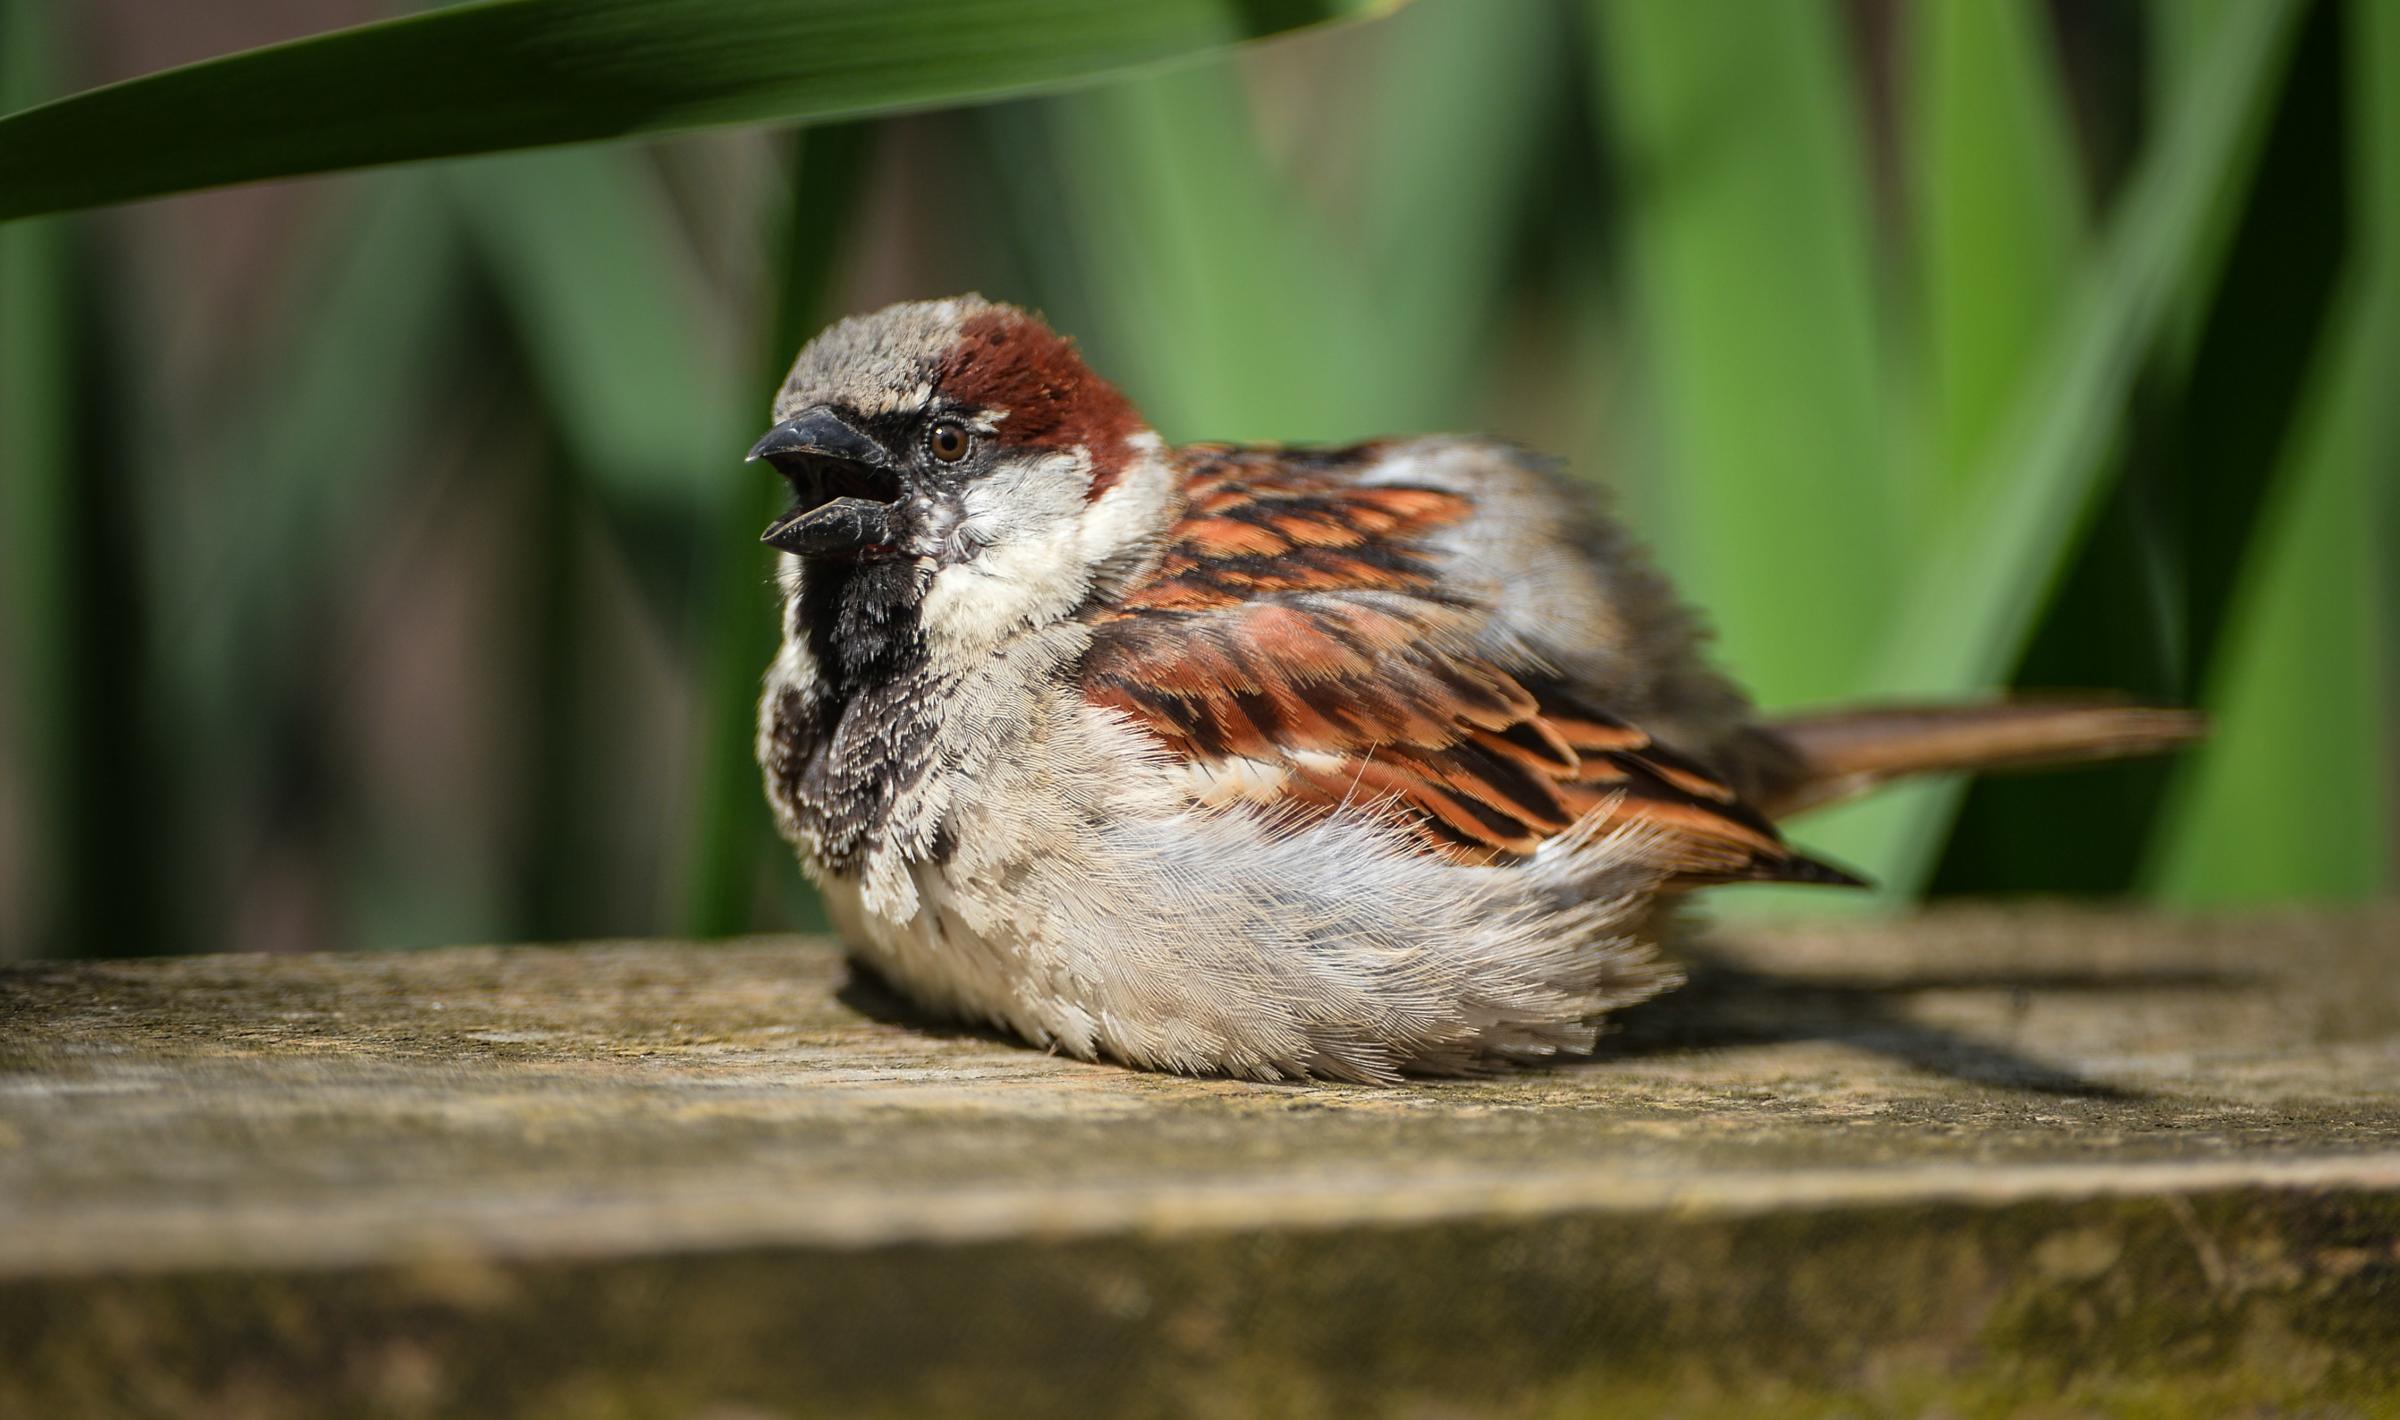 Finches are just one of the UKs diverse species that the zoo is helping to encourage back into communities.